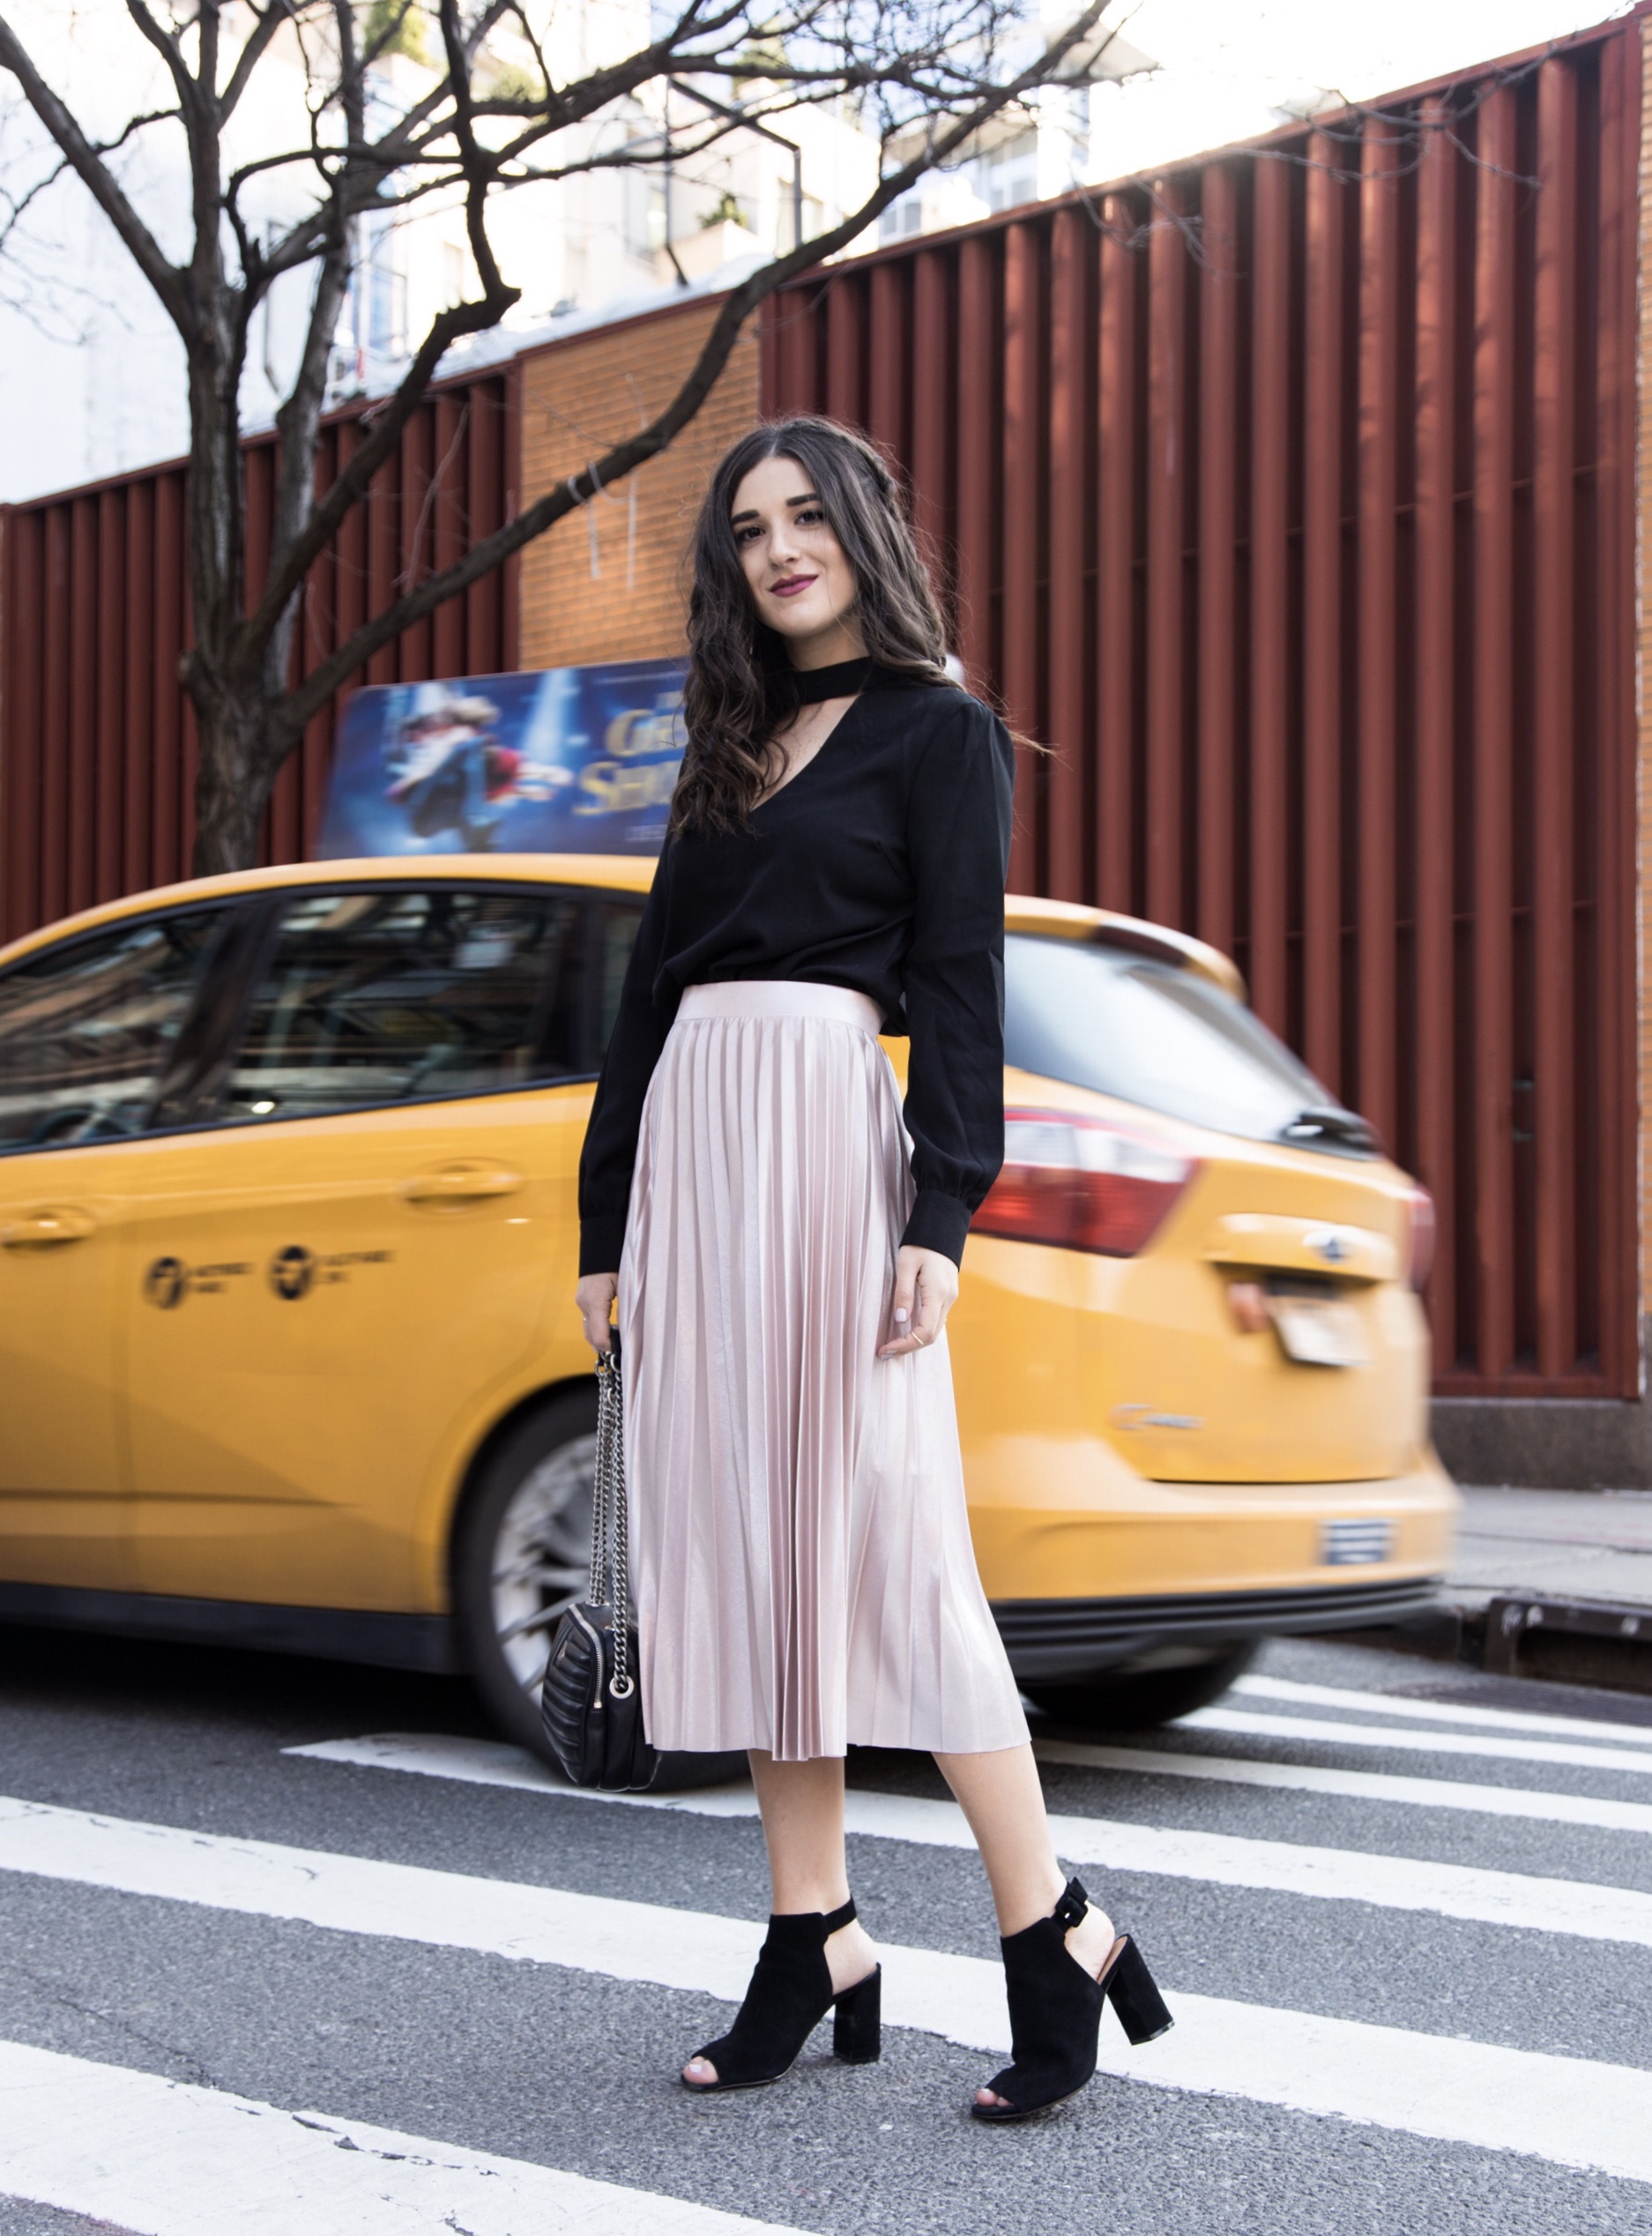 Metallic Midi Skirt Black Cutout Top How I Pack In A Carry On Esther Santer Fashion Blog NYC Street Style Blogger Outfit OOTD Trendy Feminine Girly Spring Hairstyle Waves Travel Tips Honeymoon  Photshoot Pose Wearing Shop Peep Toe Booties Henri Bendel.jpg